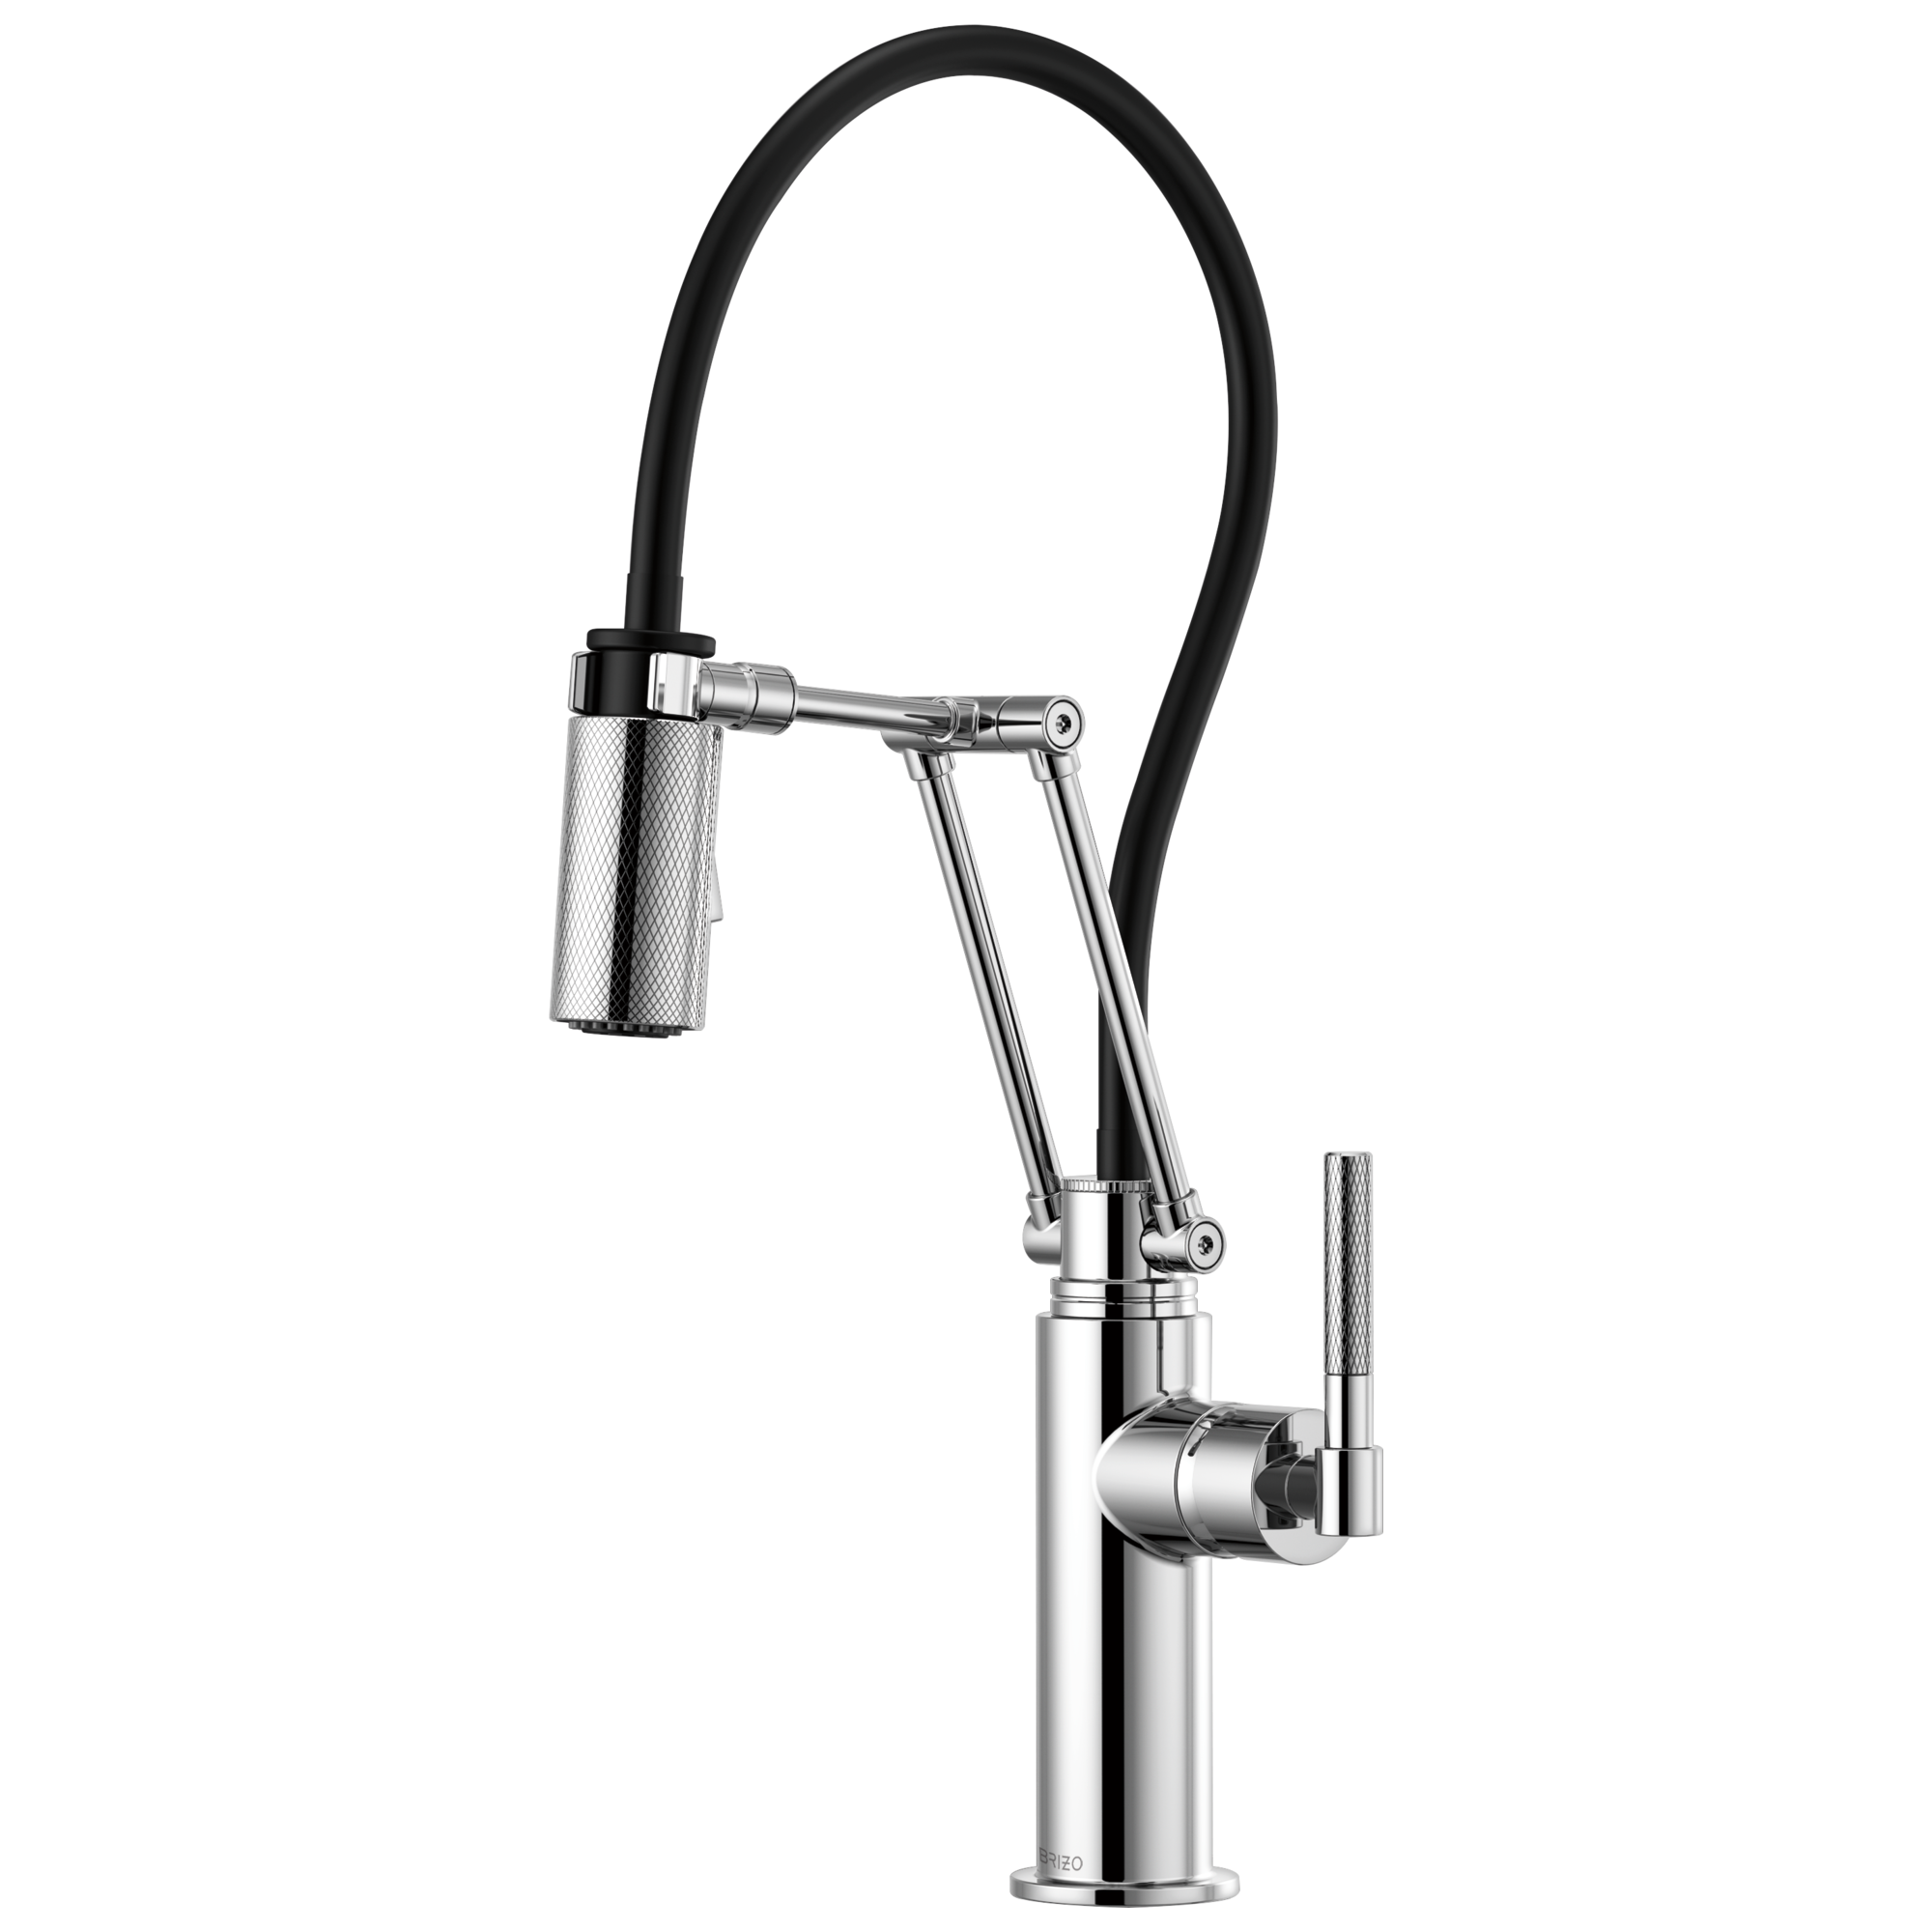 Brizo Litze: Articulating Faucet with Knurled Handle